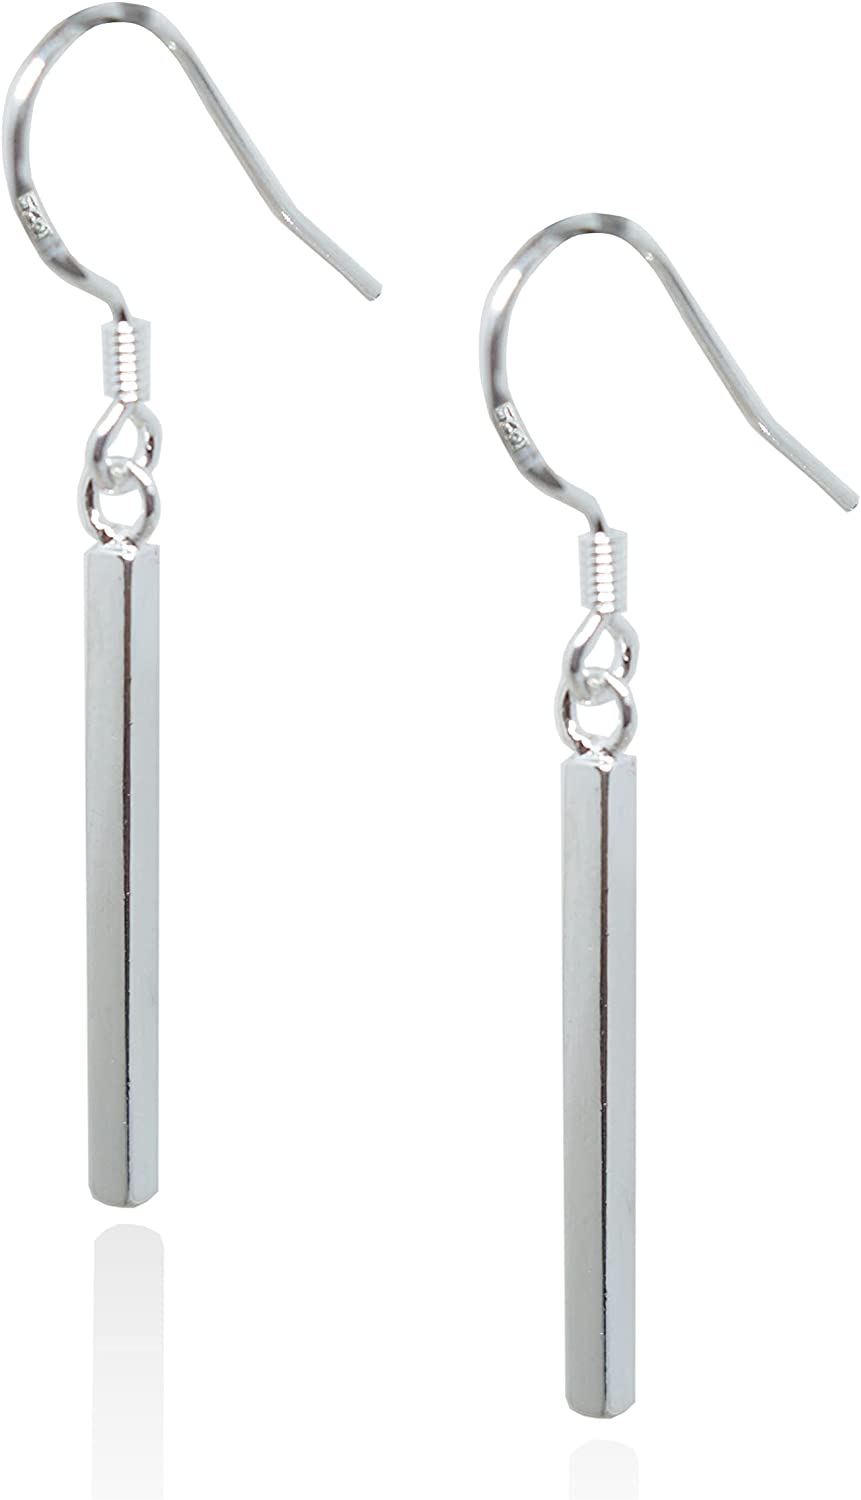 Skinny silver Bars. About 1.80 CM with out hook. Hook Closure with 925 mark stamp. Made of 925 Sterling Silver. Hypoallergenic. Trendy Sterling Silver Earrings. Dainty, Light Weight, Dangling Earring